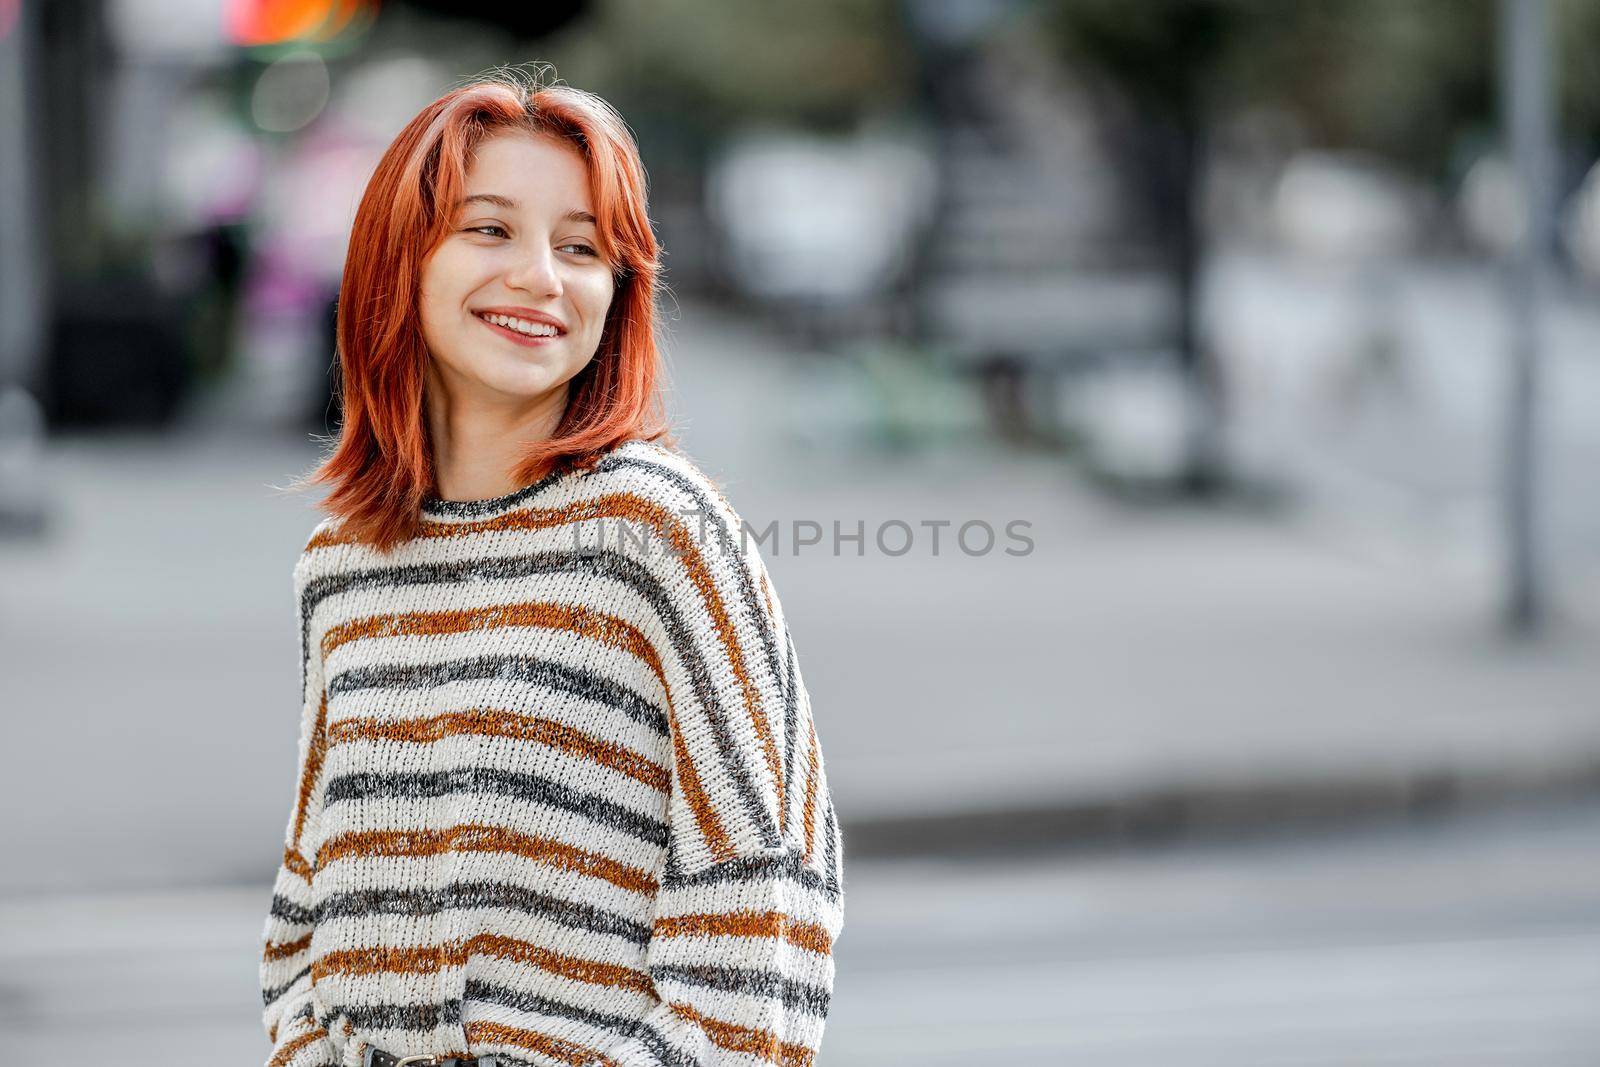 Stylish girl in casual trendy clothes walking at street and smiling. Urban portrait of pretty female teenager with bright hair